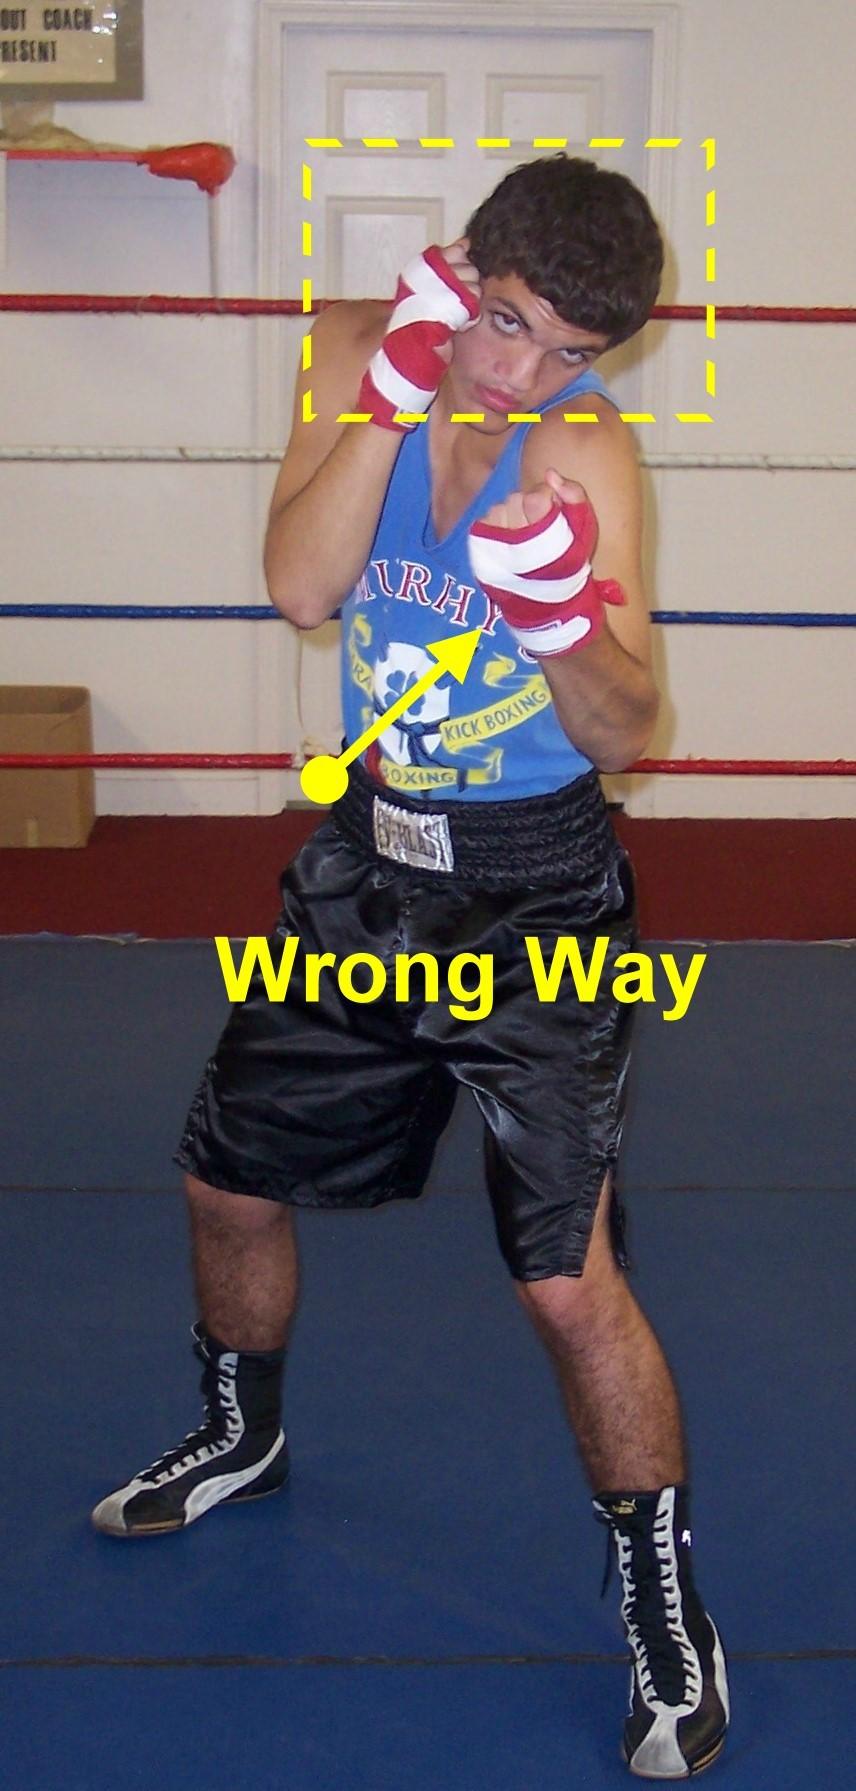 Lead Hand Uppercut The lead hand uppercut in almost the exact same way. The exceptions are the Lead shoulder 12 and Hip are already forward limiting Power.